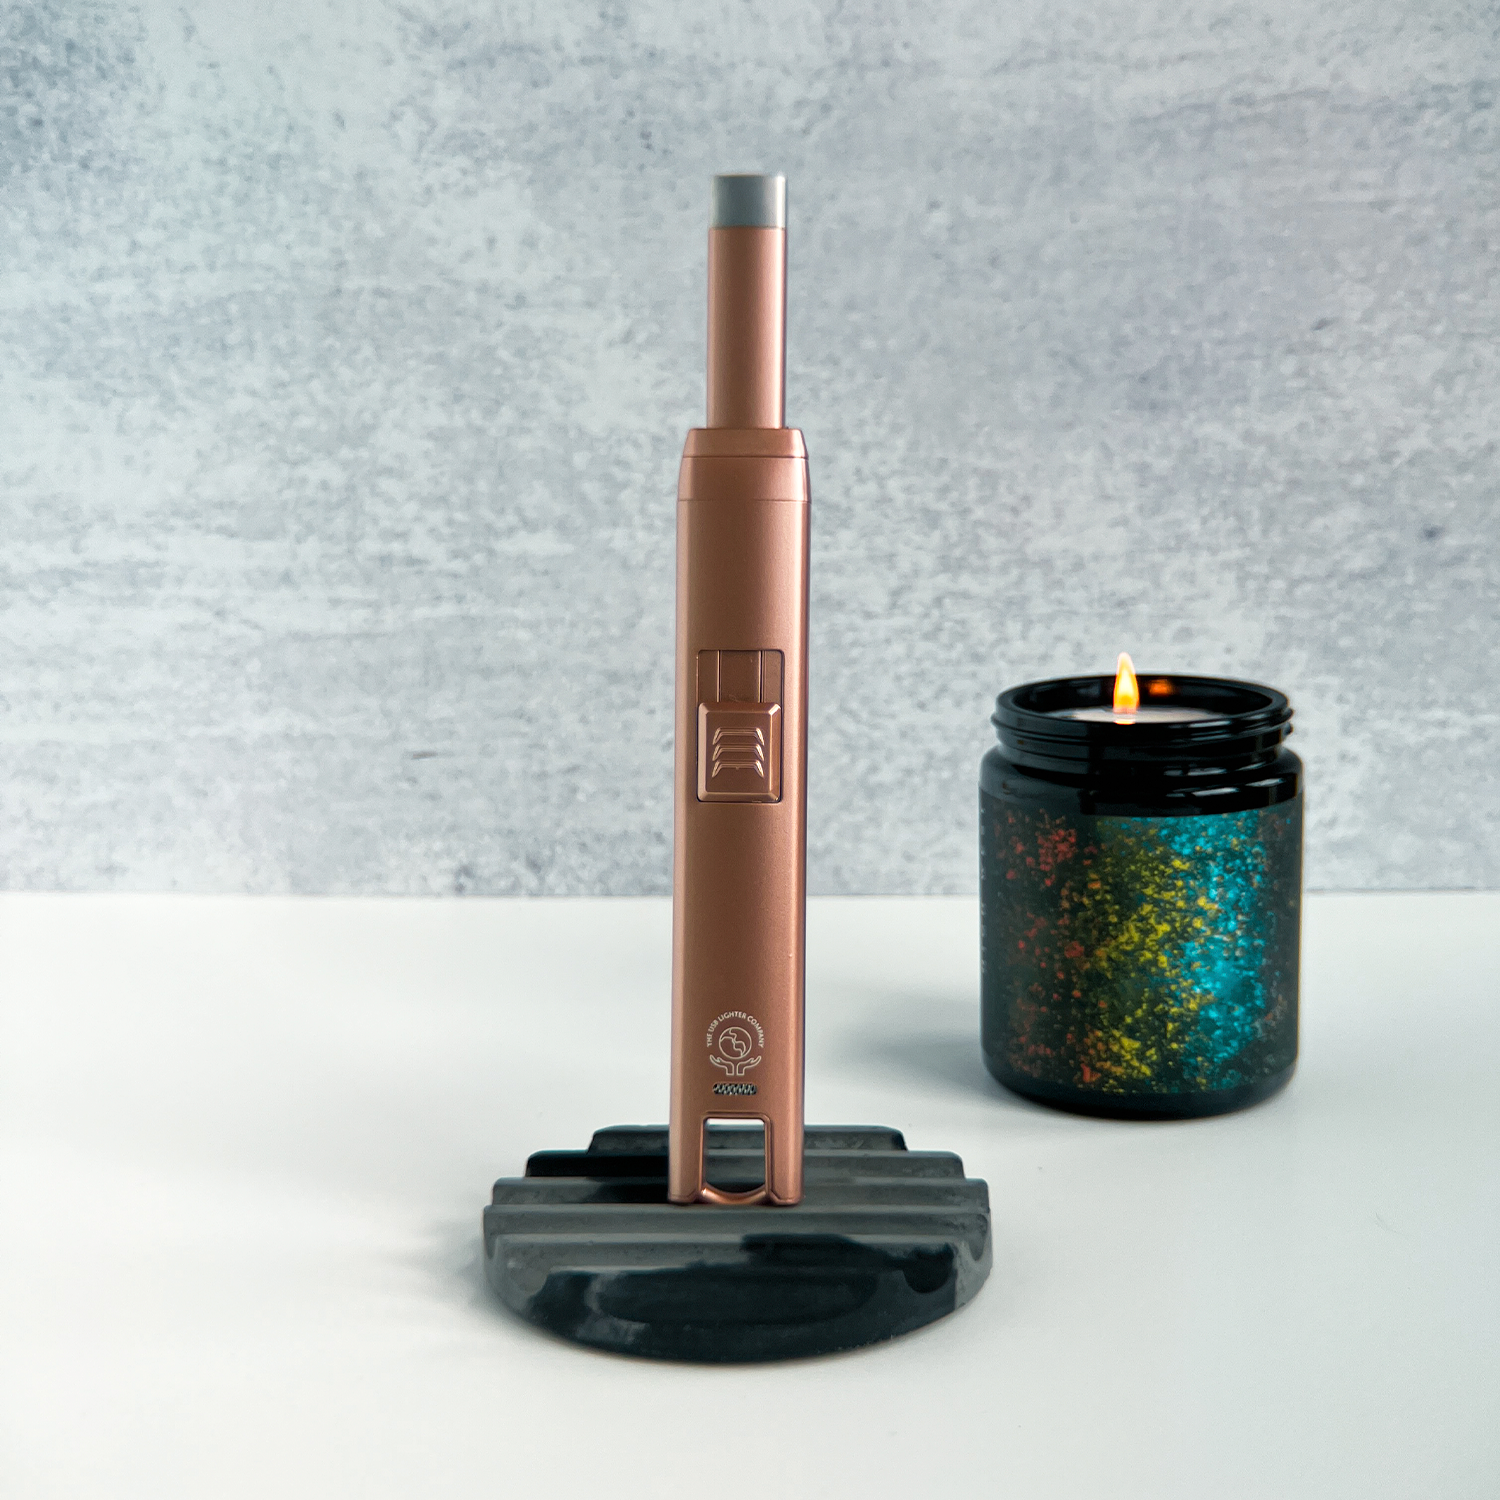 THE ARC Electric Candle Lighter Rose Gold rechargeable & eco-friendly